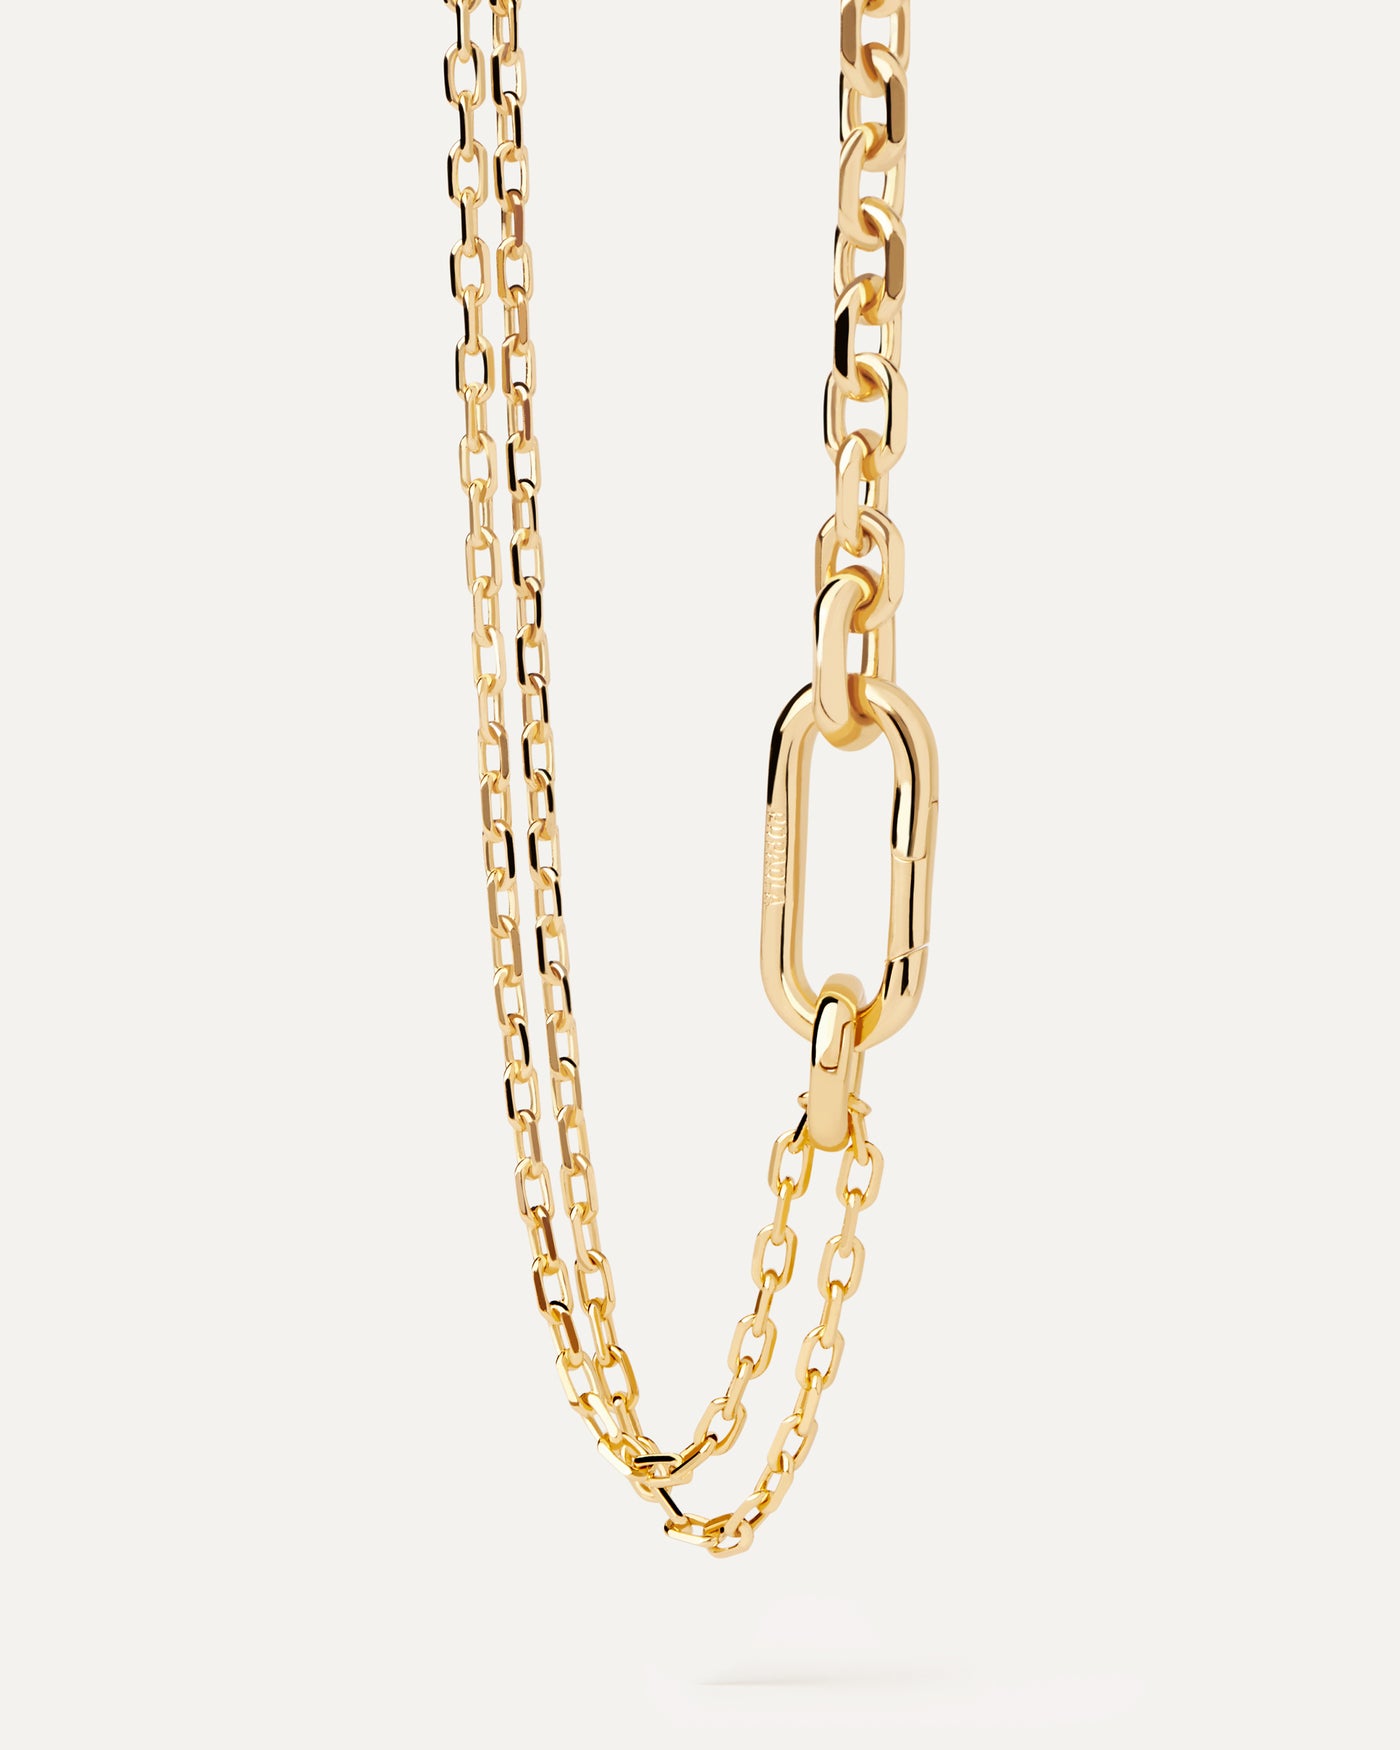 2023 Selection | Vesta Chain Necklace. Gold-plated double chain necklace with bold clasp and asymmetrical links. Get the latest arrival from PDPAOLA. Place your order safely and get this Best Seller. Free Shipping.